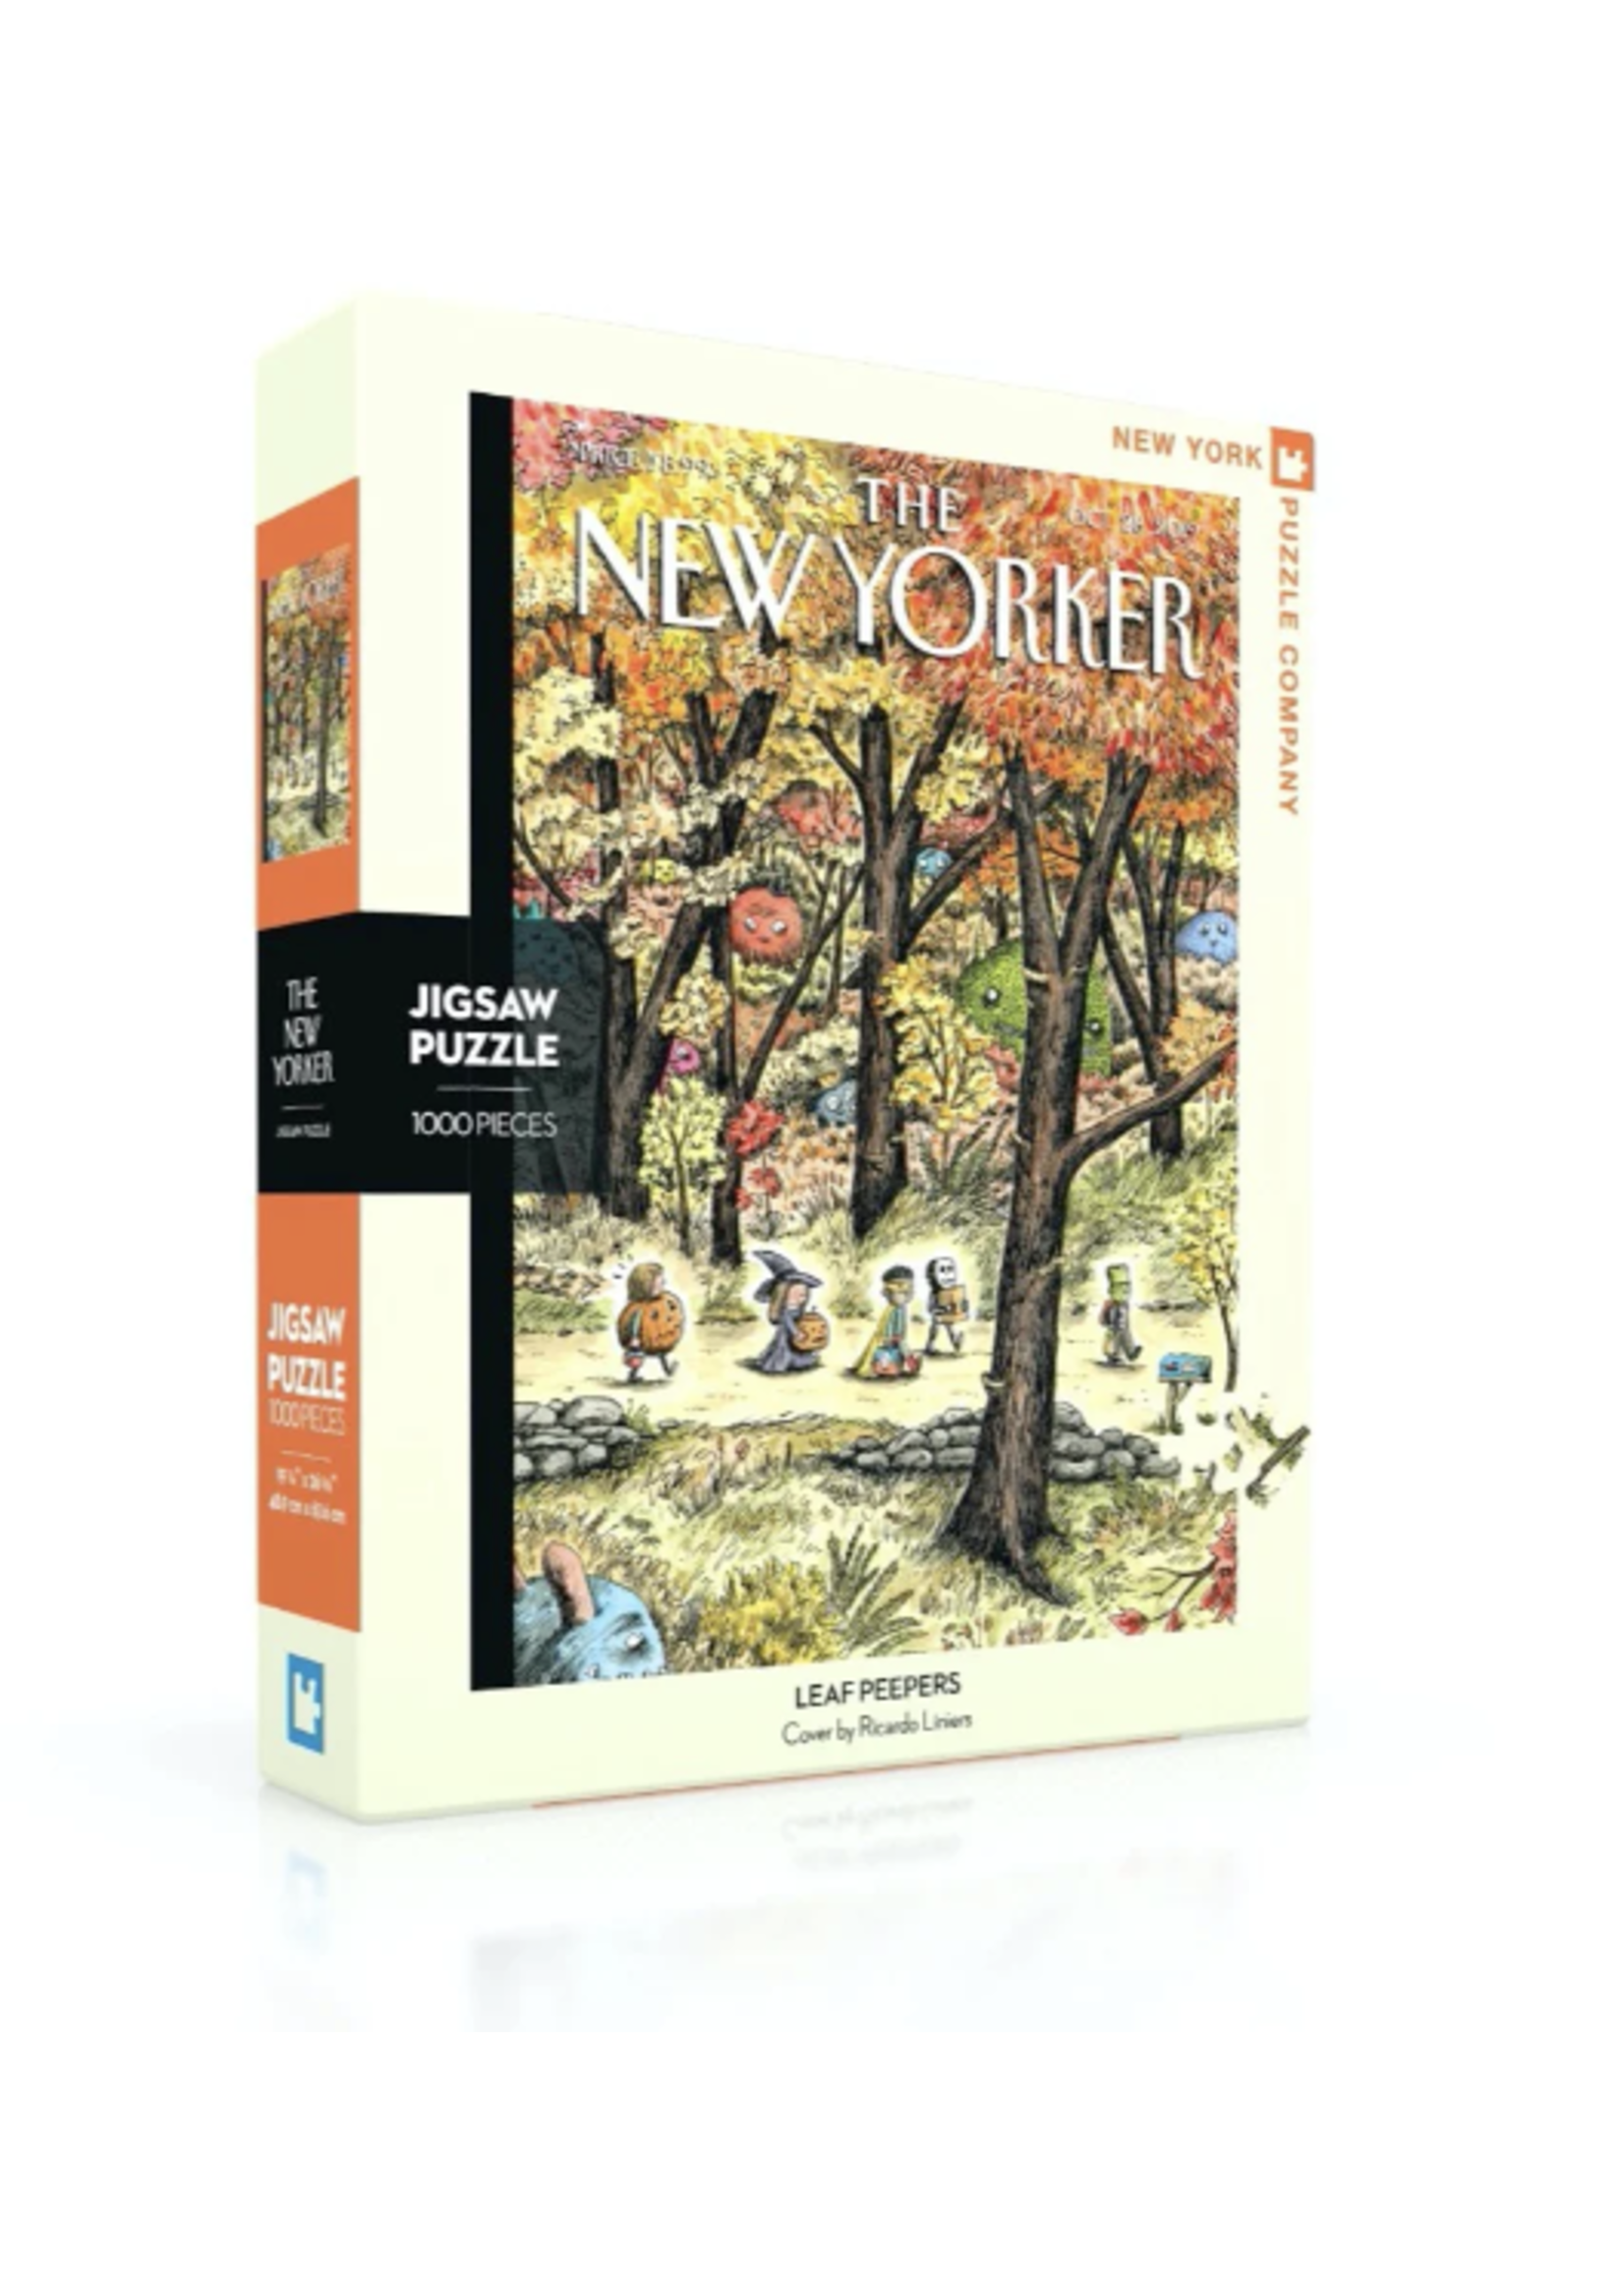 New York Puzzle Co. Leaf Peepers Puzzle